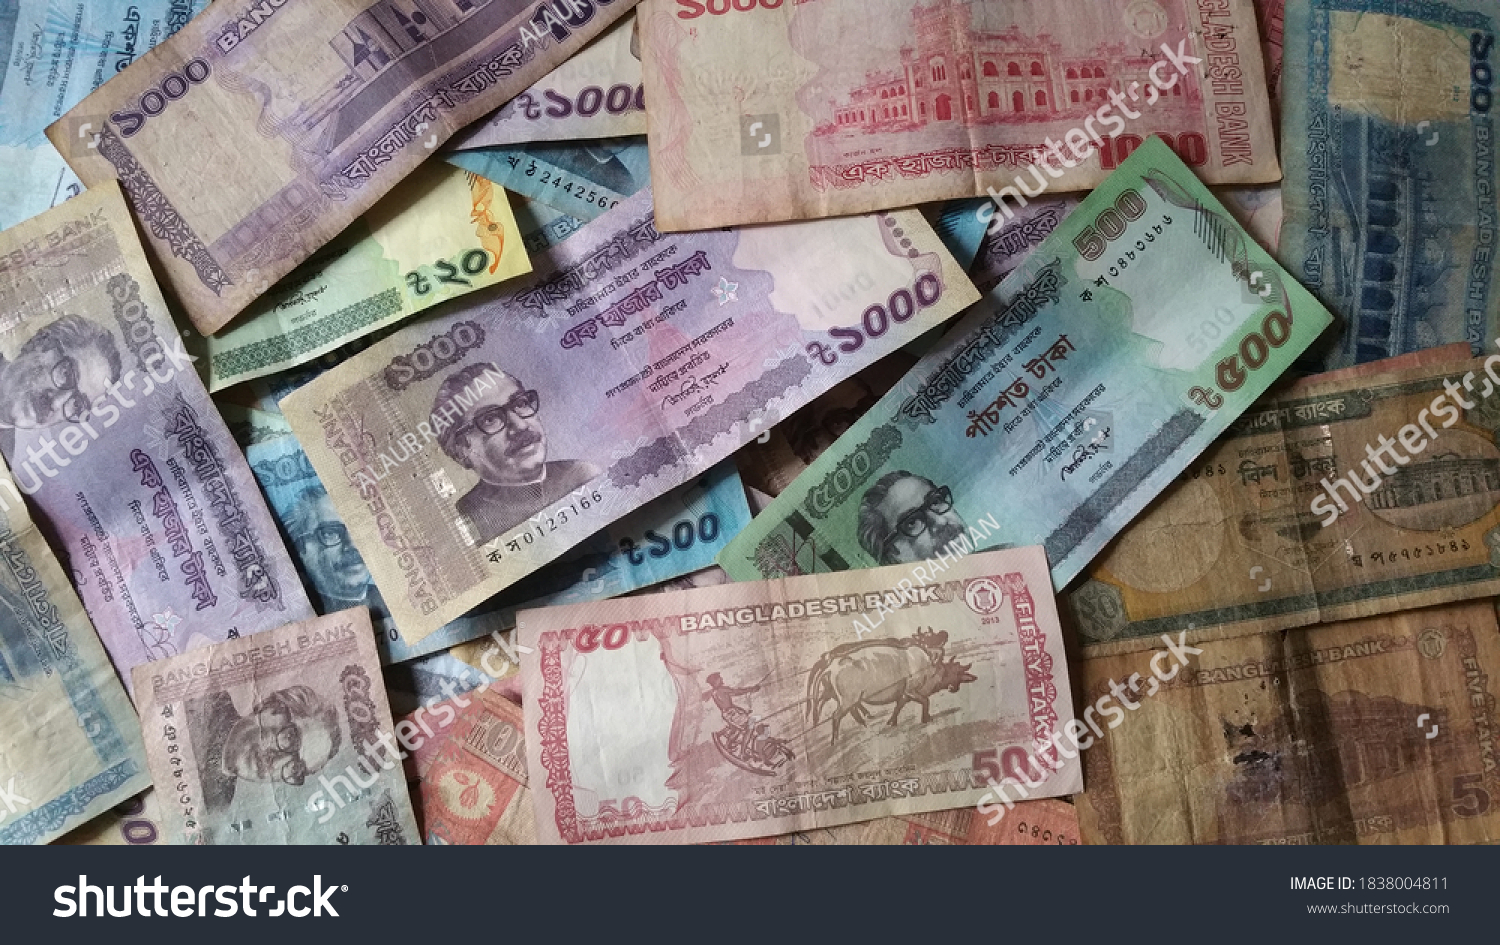 Bangladesh currency Images, Stock Photos & Vectors Shutterstock